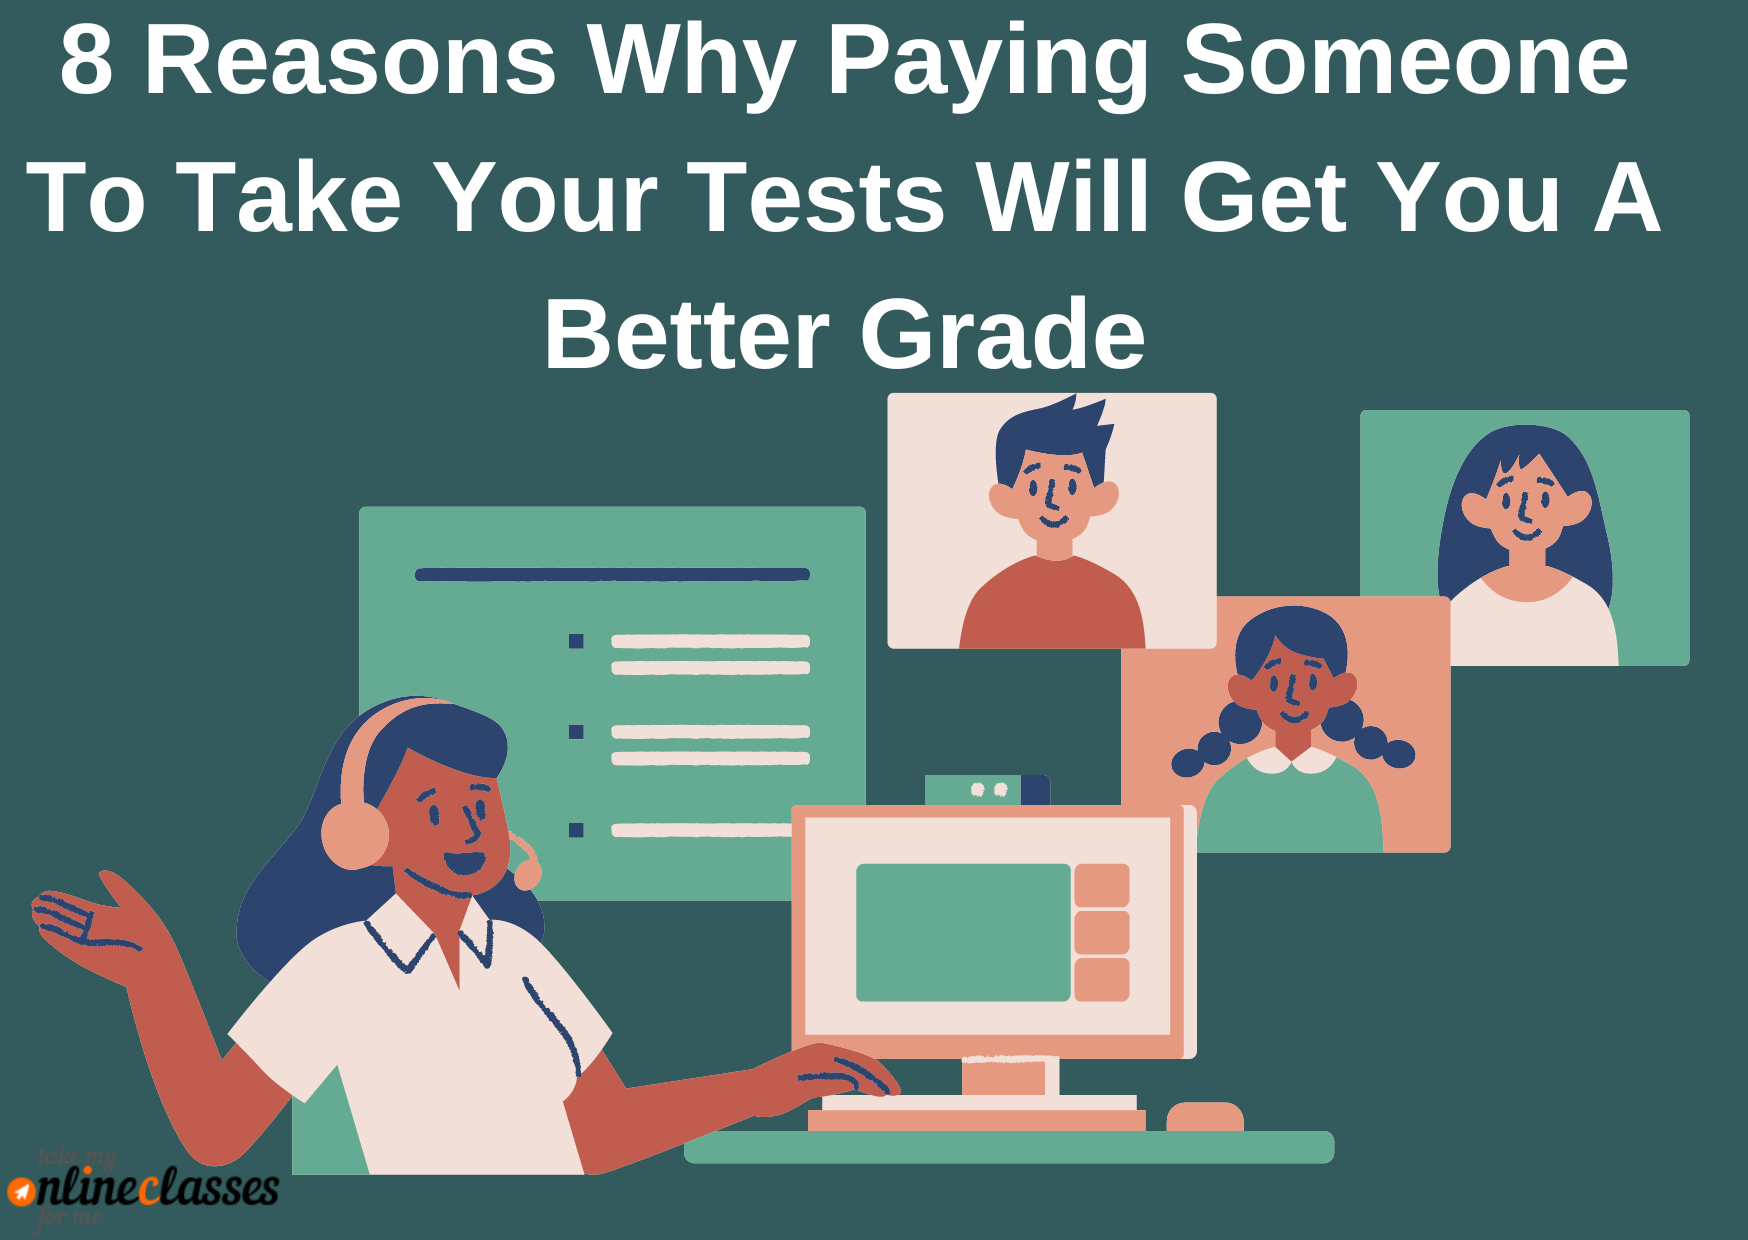 8 Reasons Why Paying Someone To Take Your Tests Will Get You A Better Grade